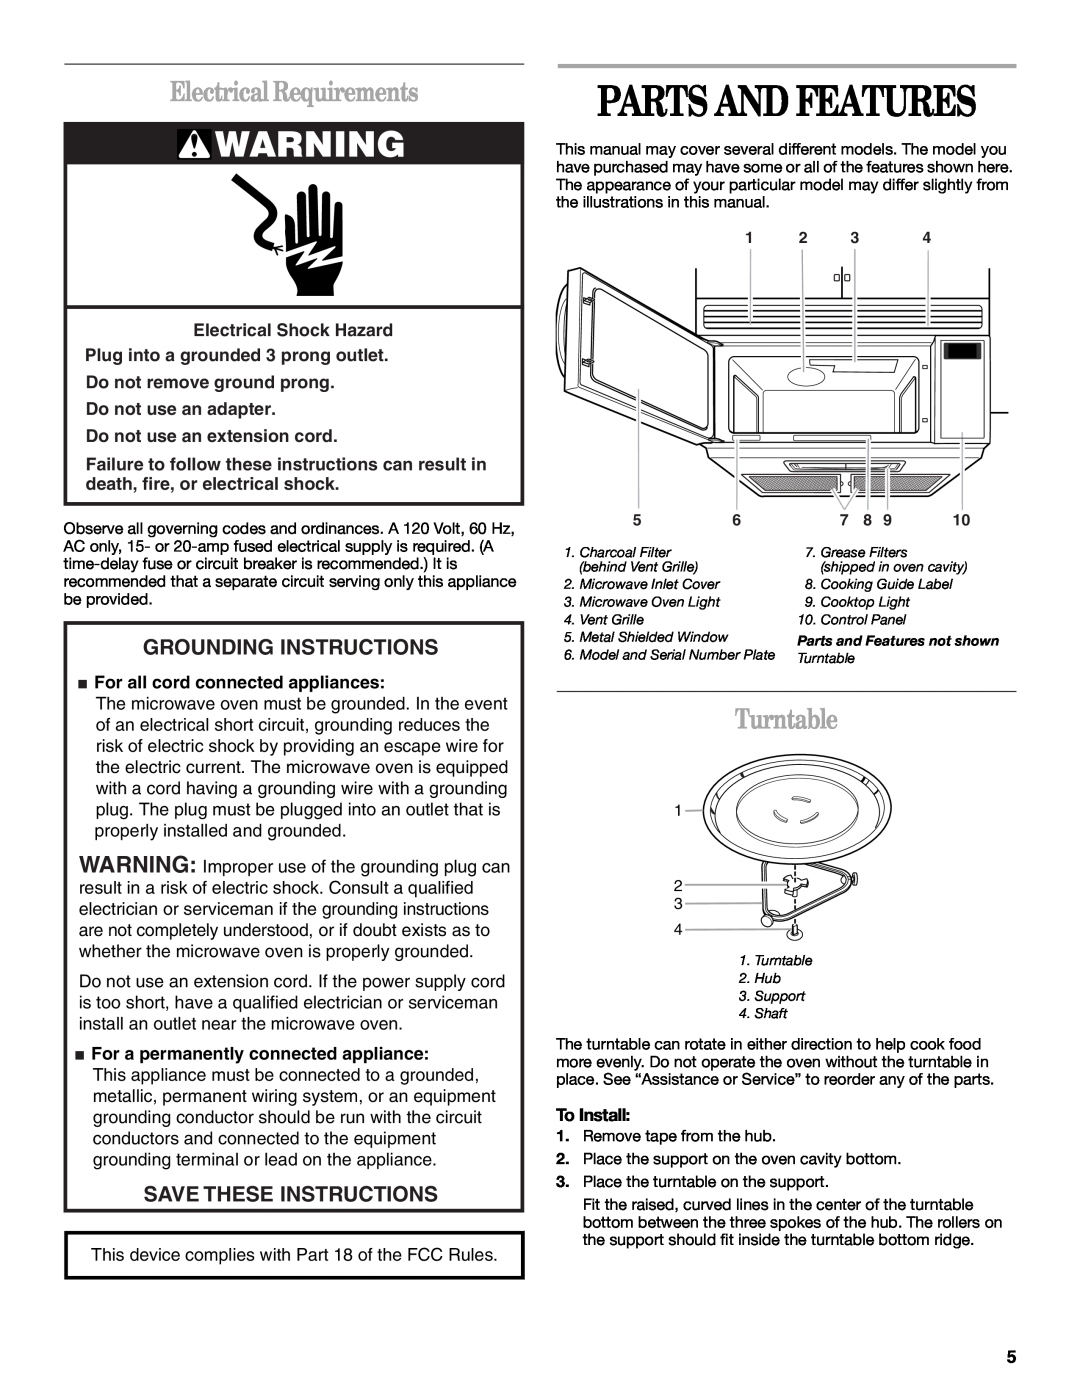 Whirlpool YMH1141XM manual Parts And Features, Electrical Requirements, Turntable, Grounding Instructions, To Install 